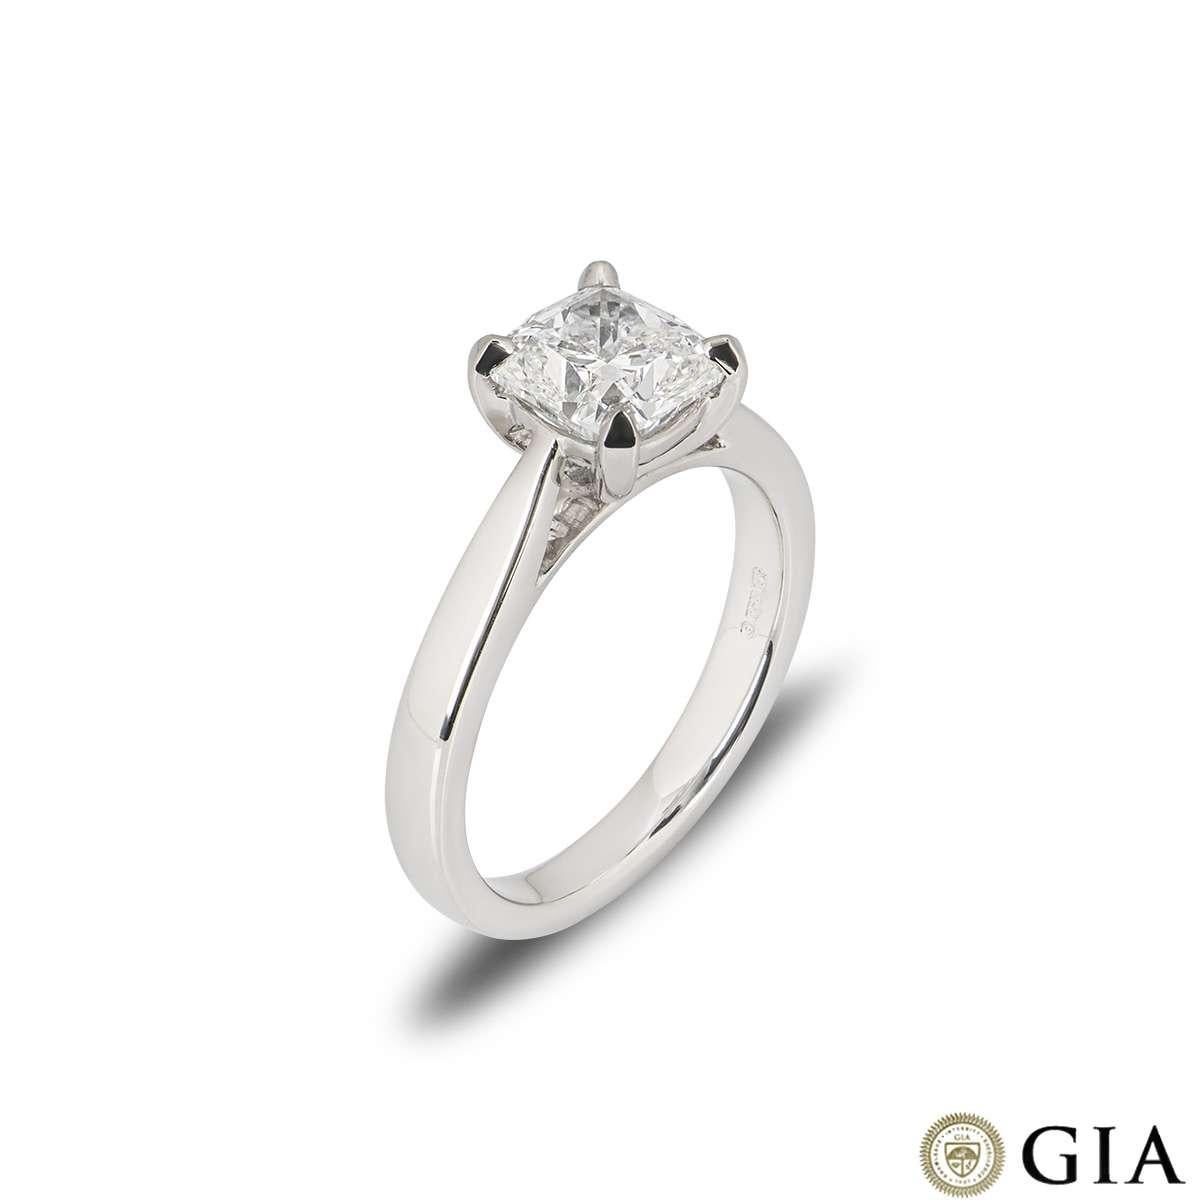 A stunning platinum cushion cut diamond engagement ring. The ring comprises of a cushion cut diamond in a four claw setting with a weight of 1.70ct, F colour and VS1 clarity. The ring is currently a size UK M / EU 52 / US 6 but can be adjusted for a